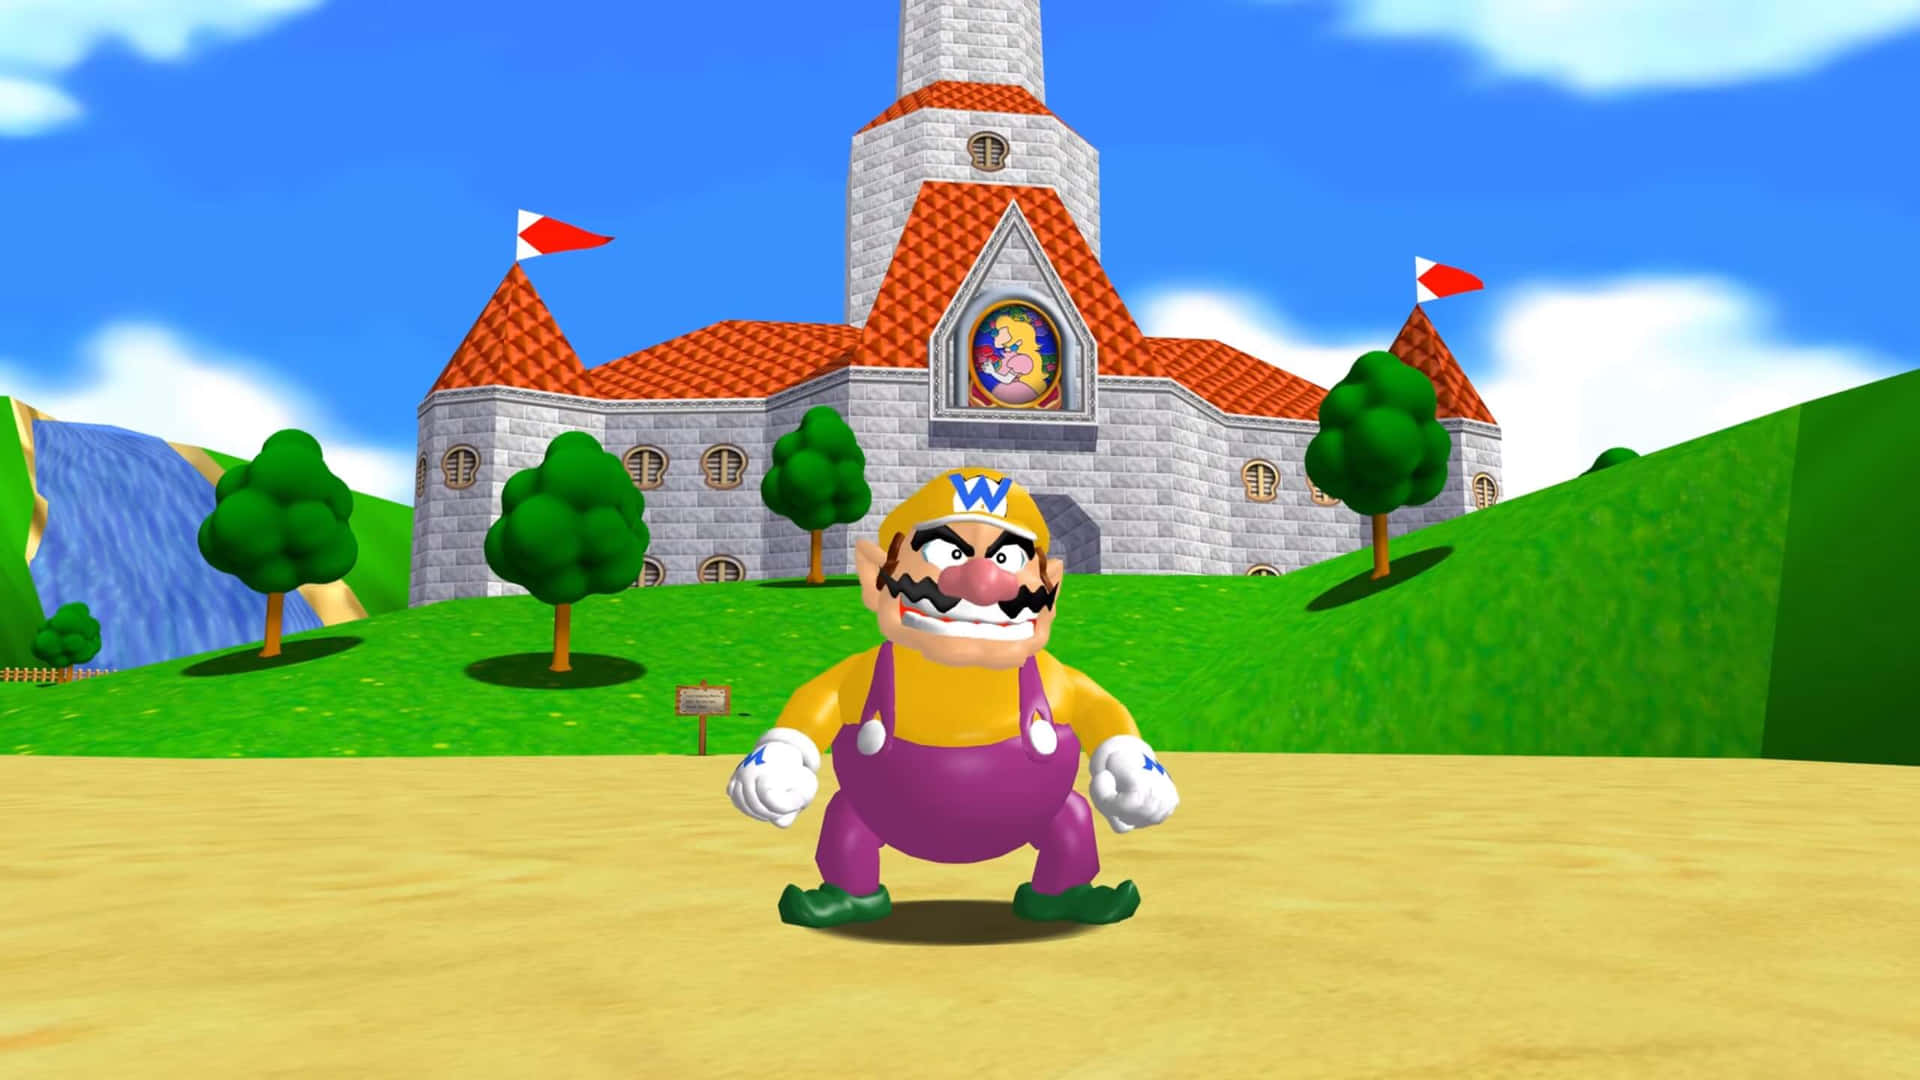 Wario In His Classic Outfit, Smirking Against A Colorful Abstract Background Background